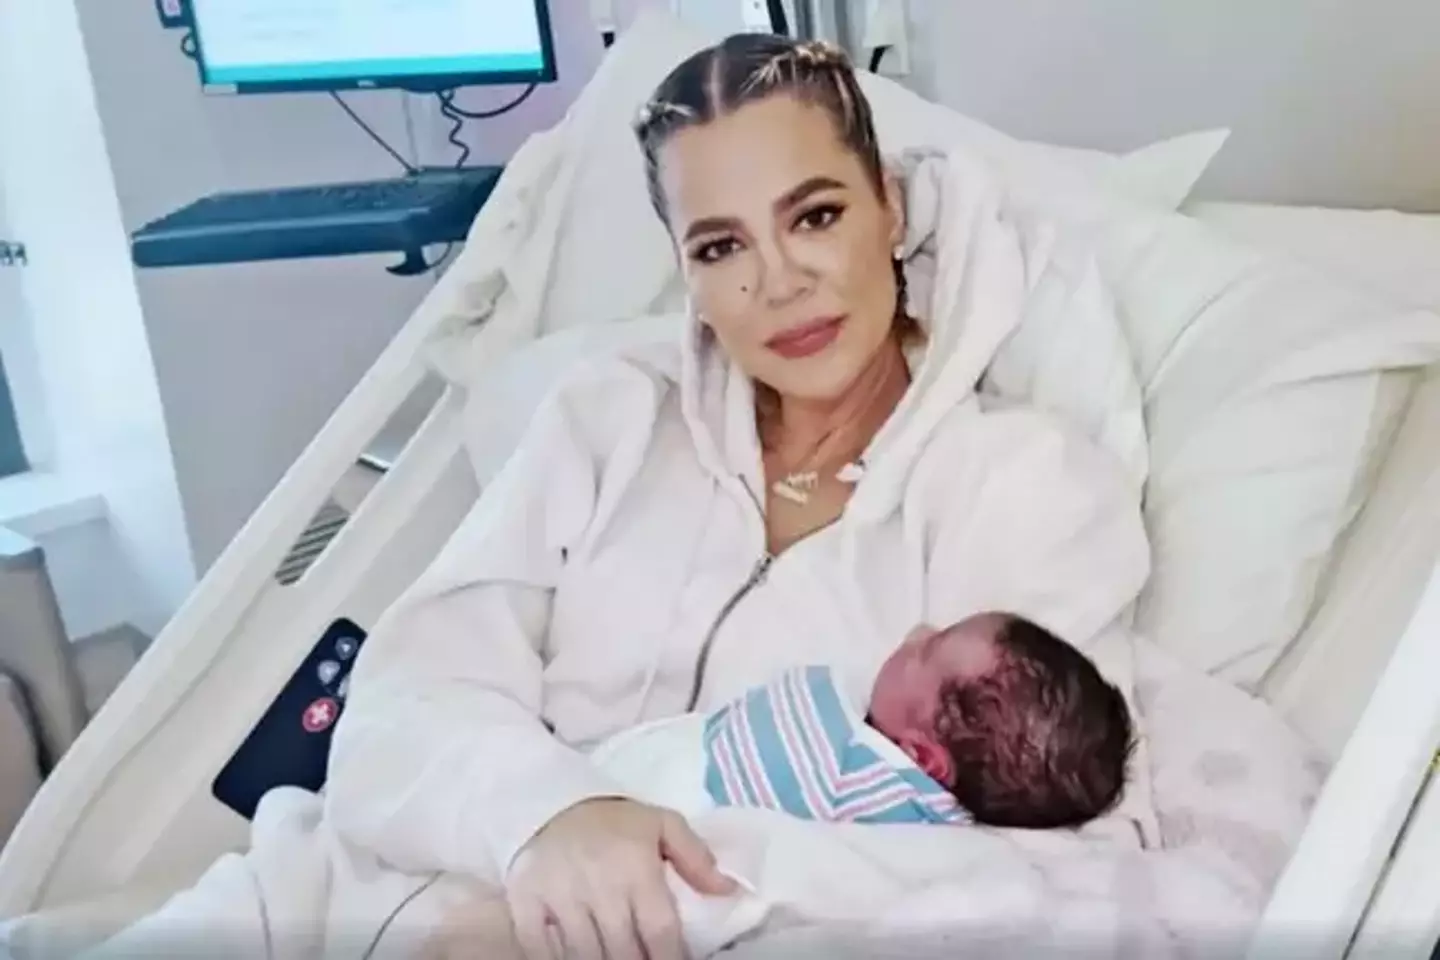 Khloe Kardashian says she feels 'less connected' to her newborn son.